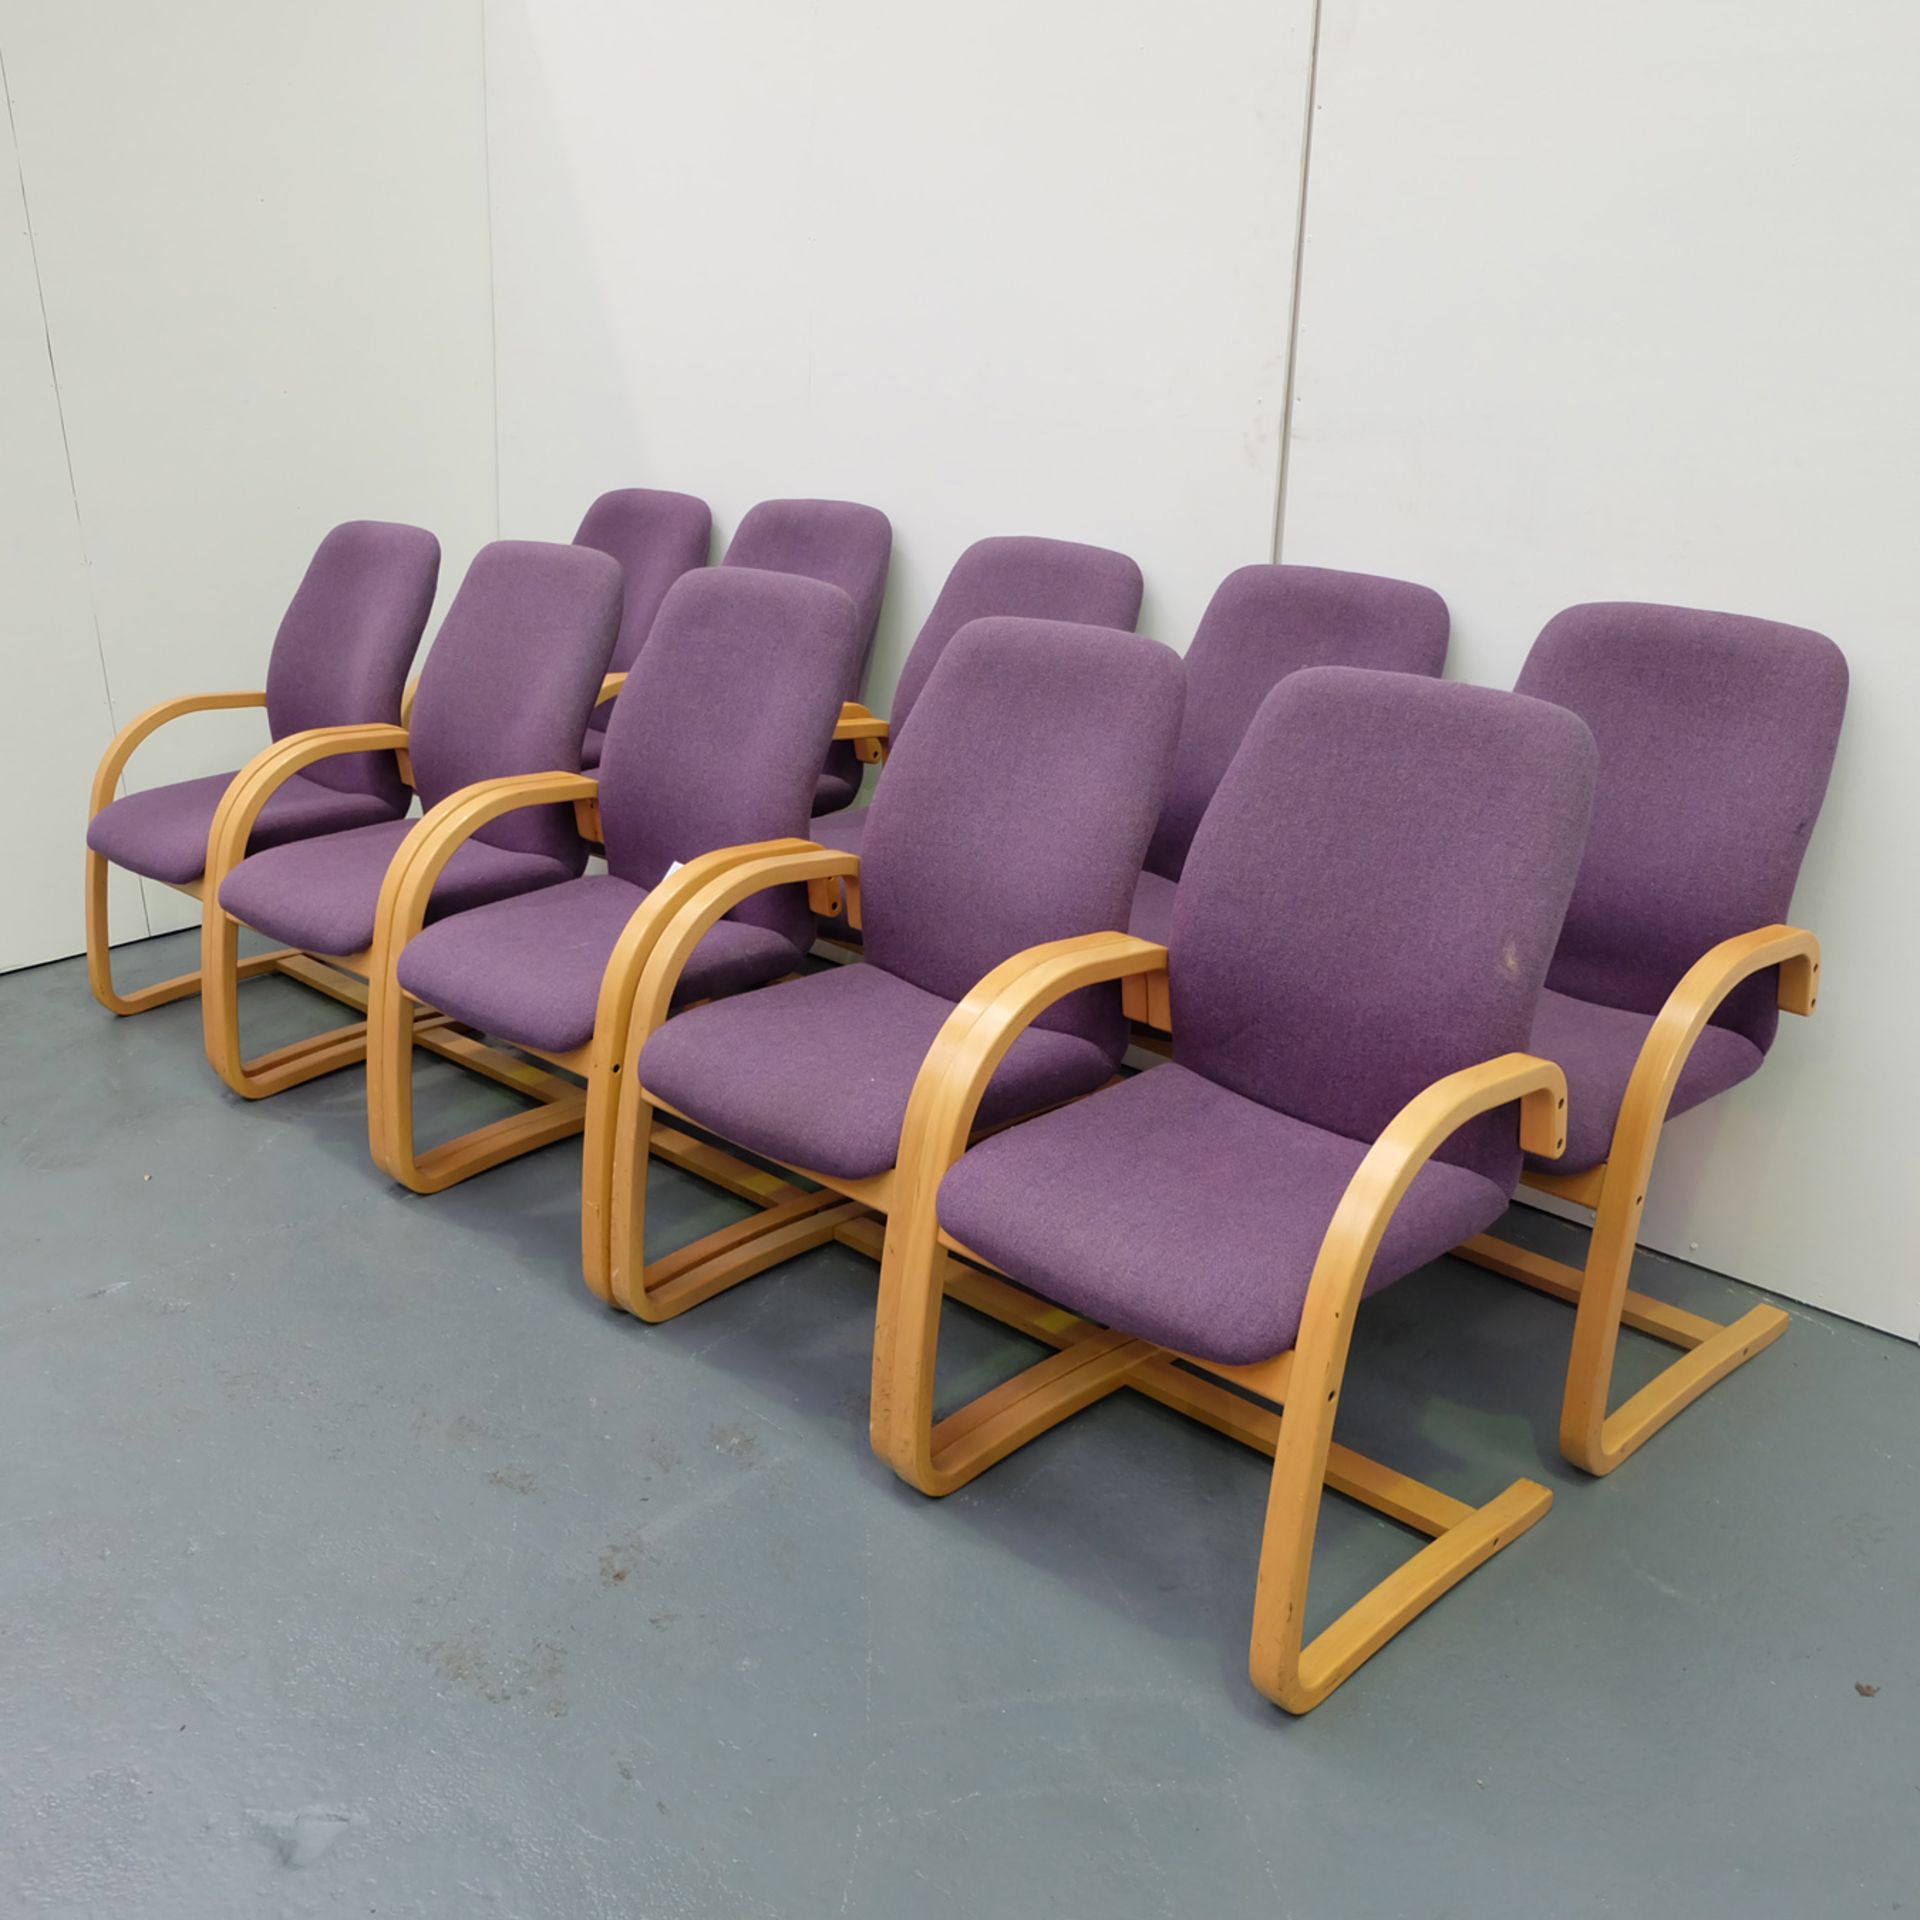 9 x Conference Chairs.